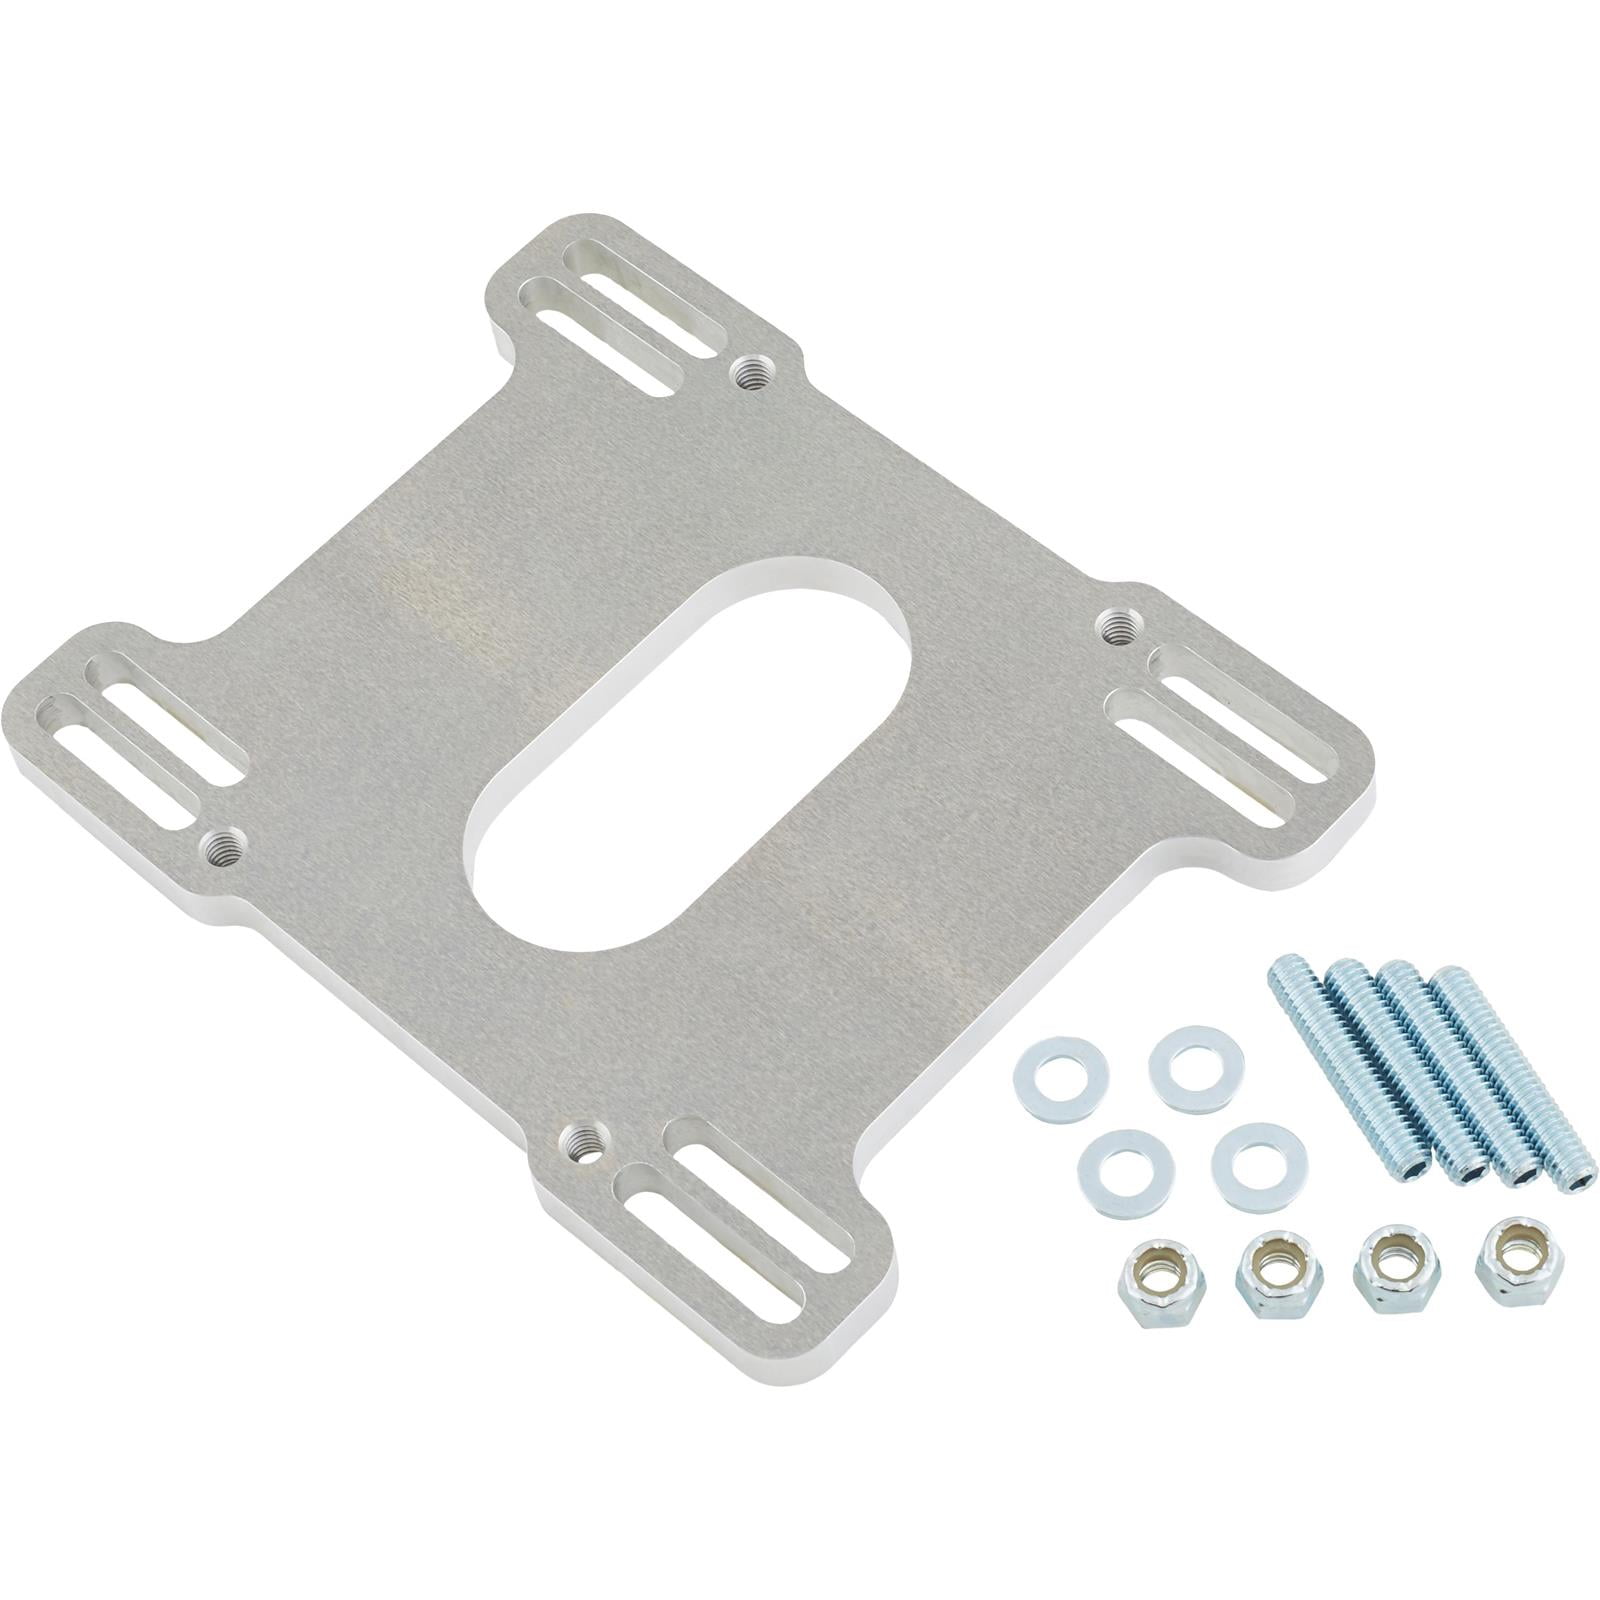  Speedway Motors Rochester 2G 2-Jet Carburetor Air Cleaner  Adapter Plate - Billet Aluminum, 3 Inlet, 5-1/2 Diameter - Adapts 5-1/8  4bbl. Cleaner to 2G 2bbl. Carb, Modifiable for 2GC Models : Automotive